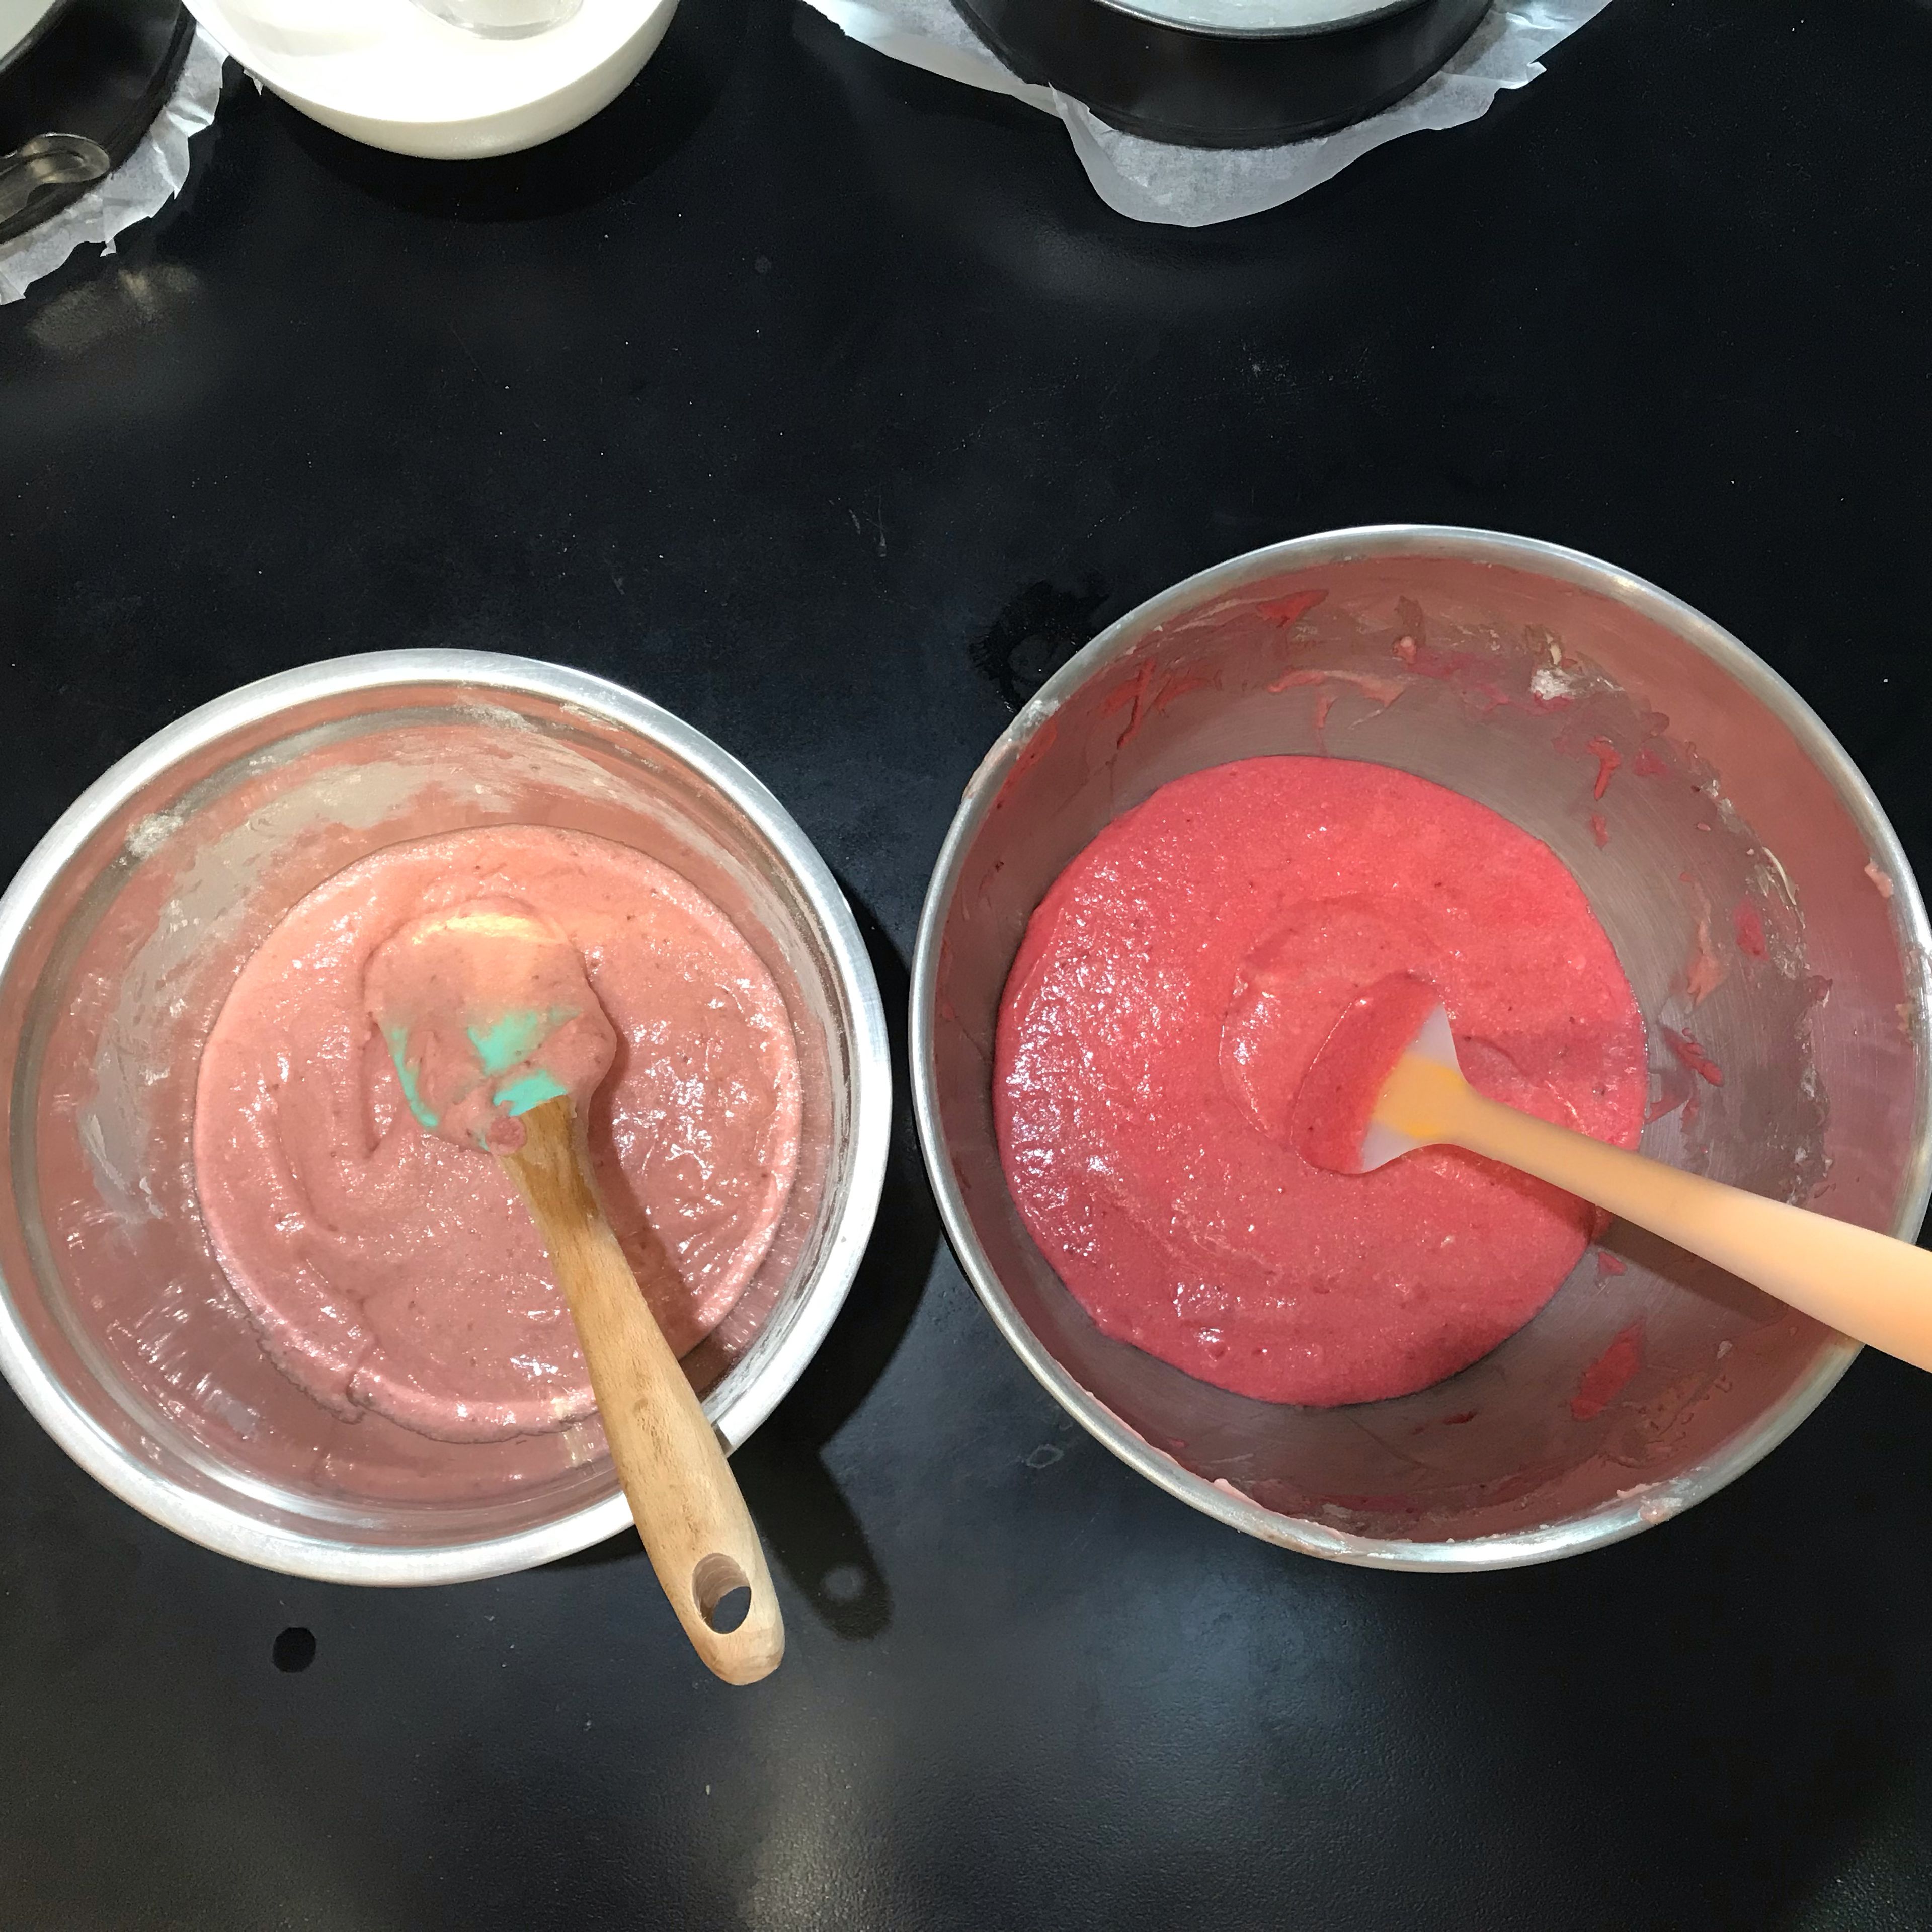 Divide the batter evenly between two bowls. Tint one with red food coloring and mix until colored.